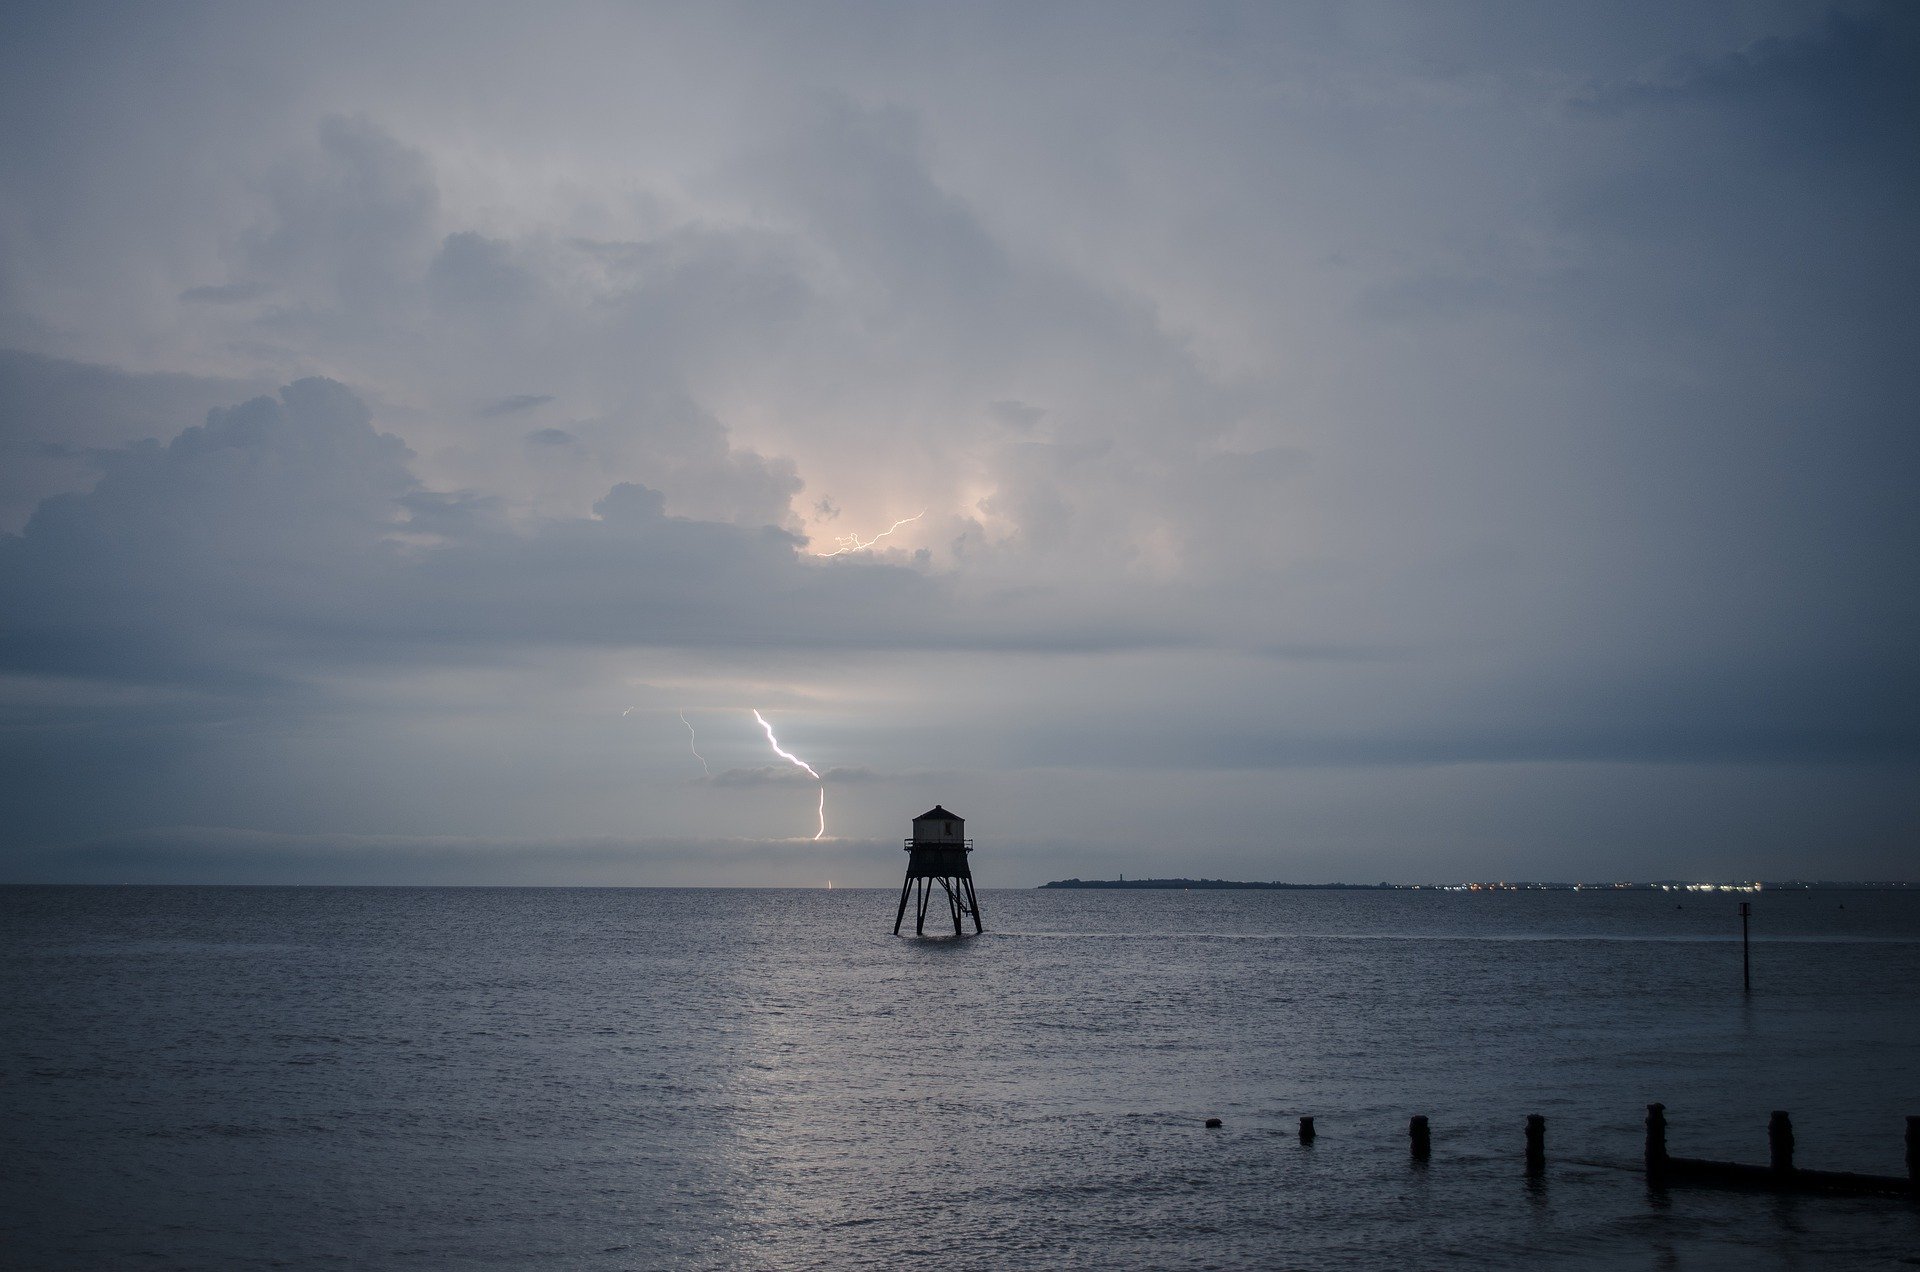 Lighting storm over water, expressing shock of the day and the year